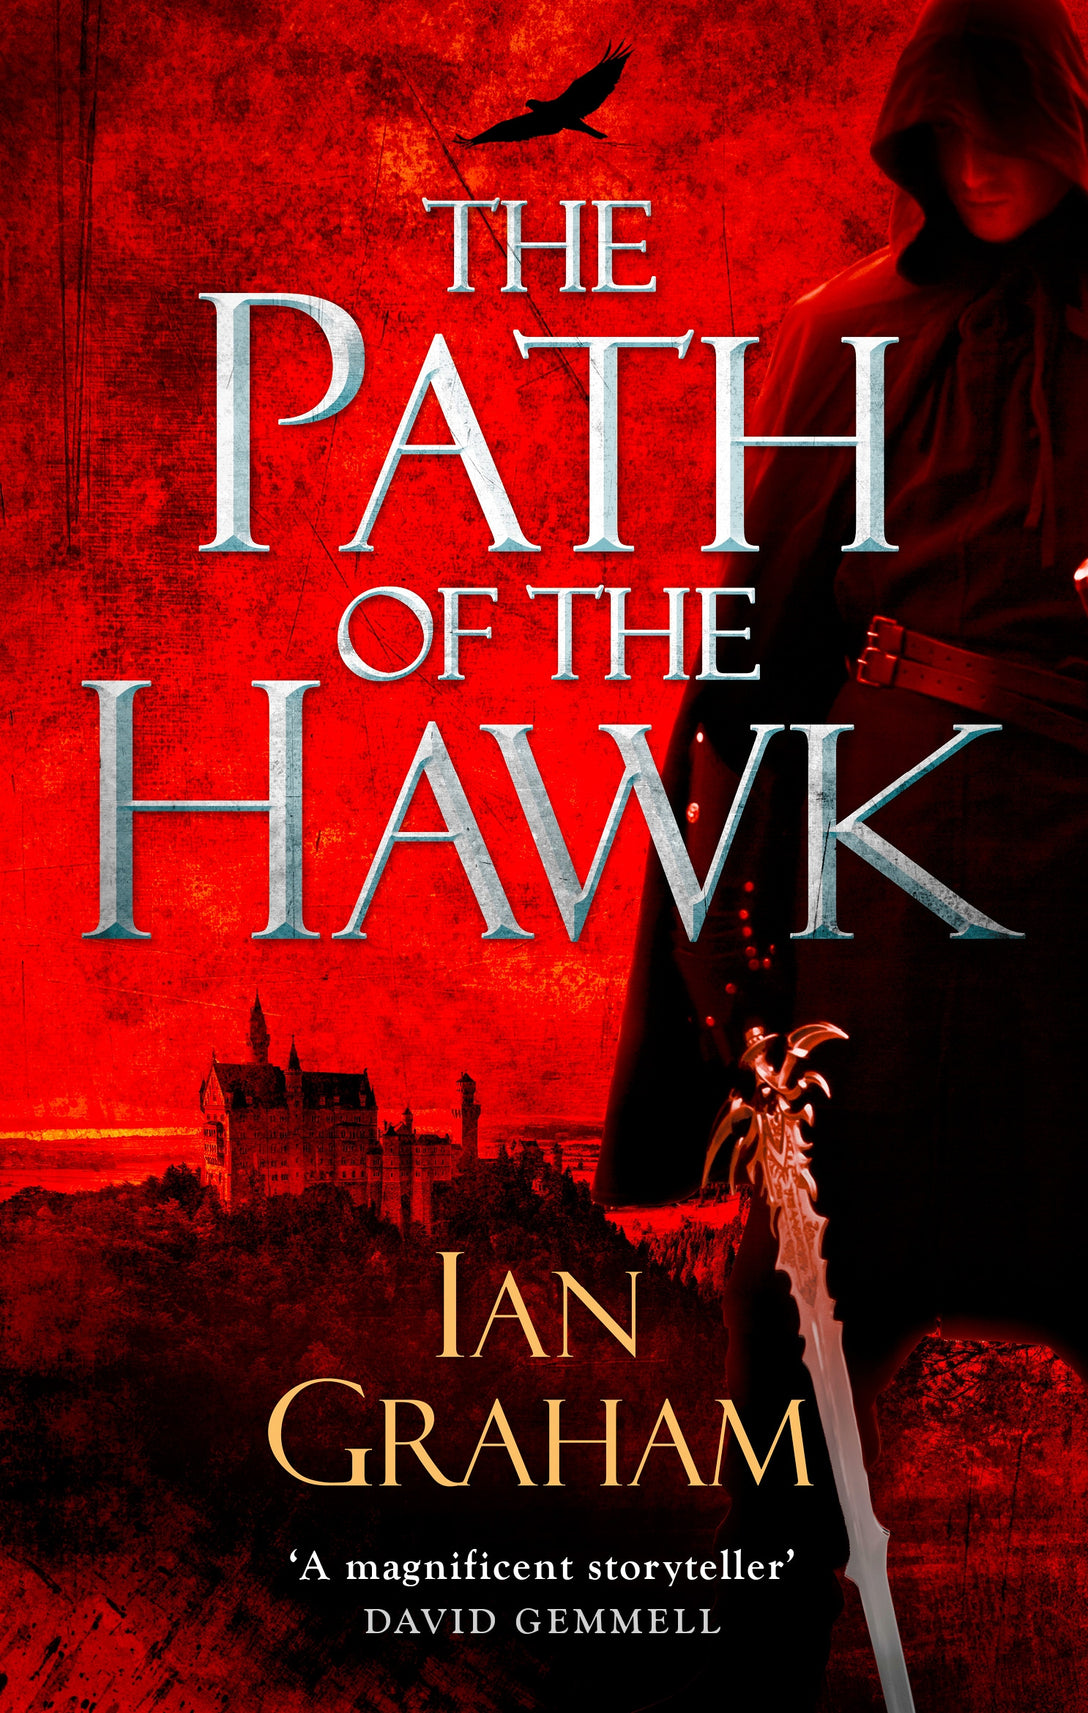 The Path of the Hawk by Ian Graham